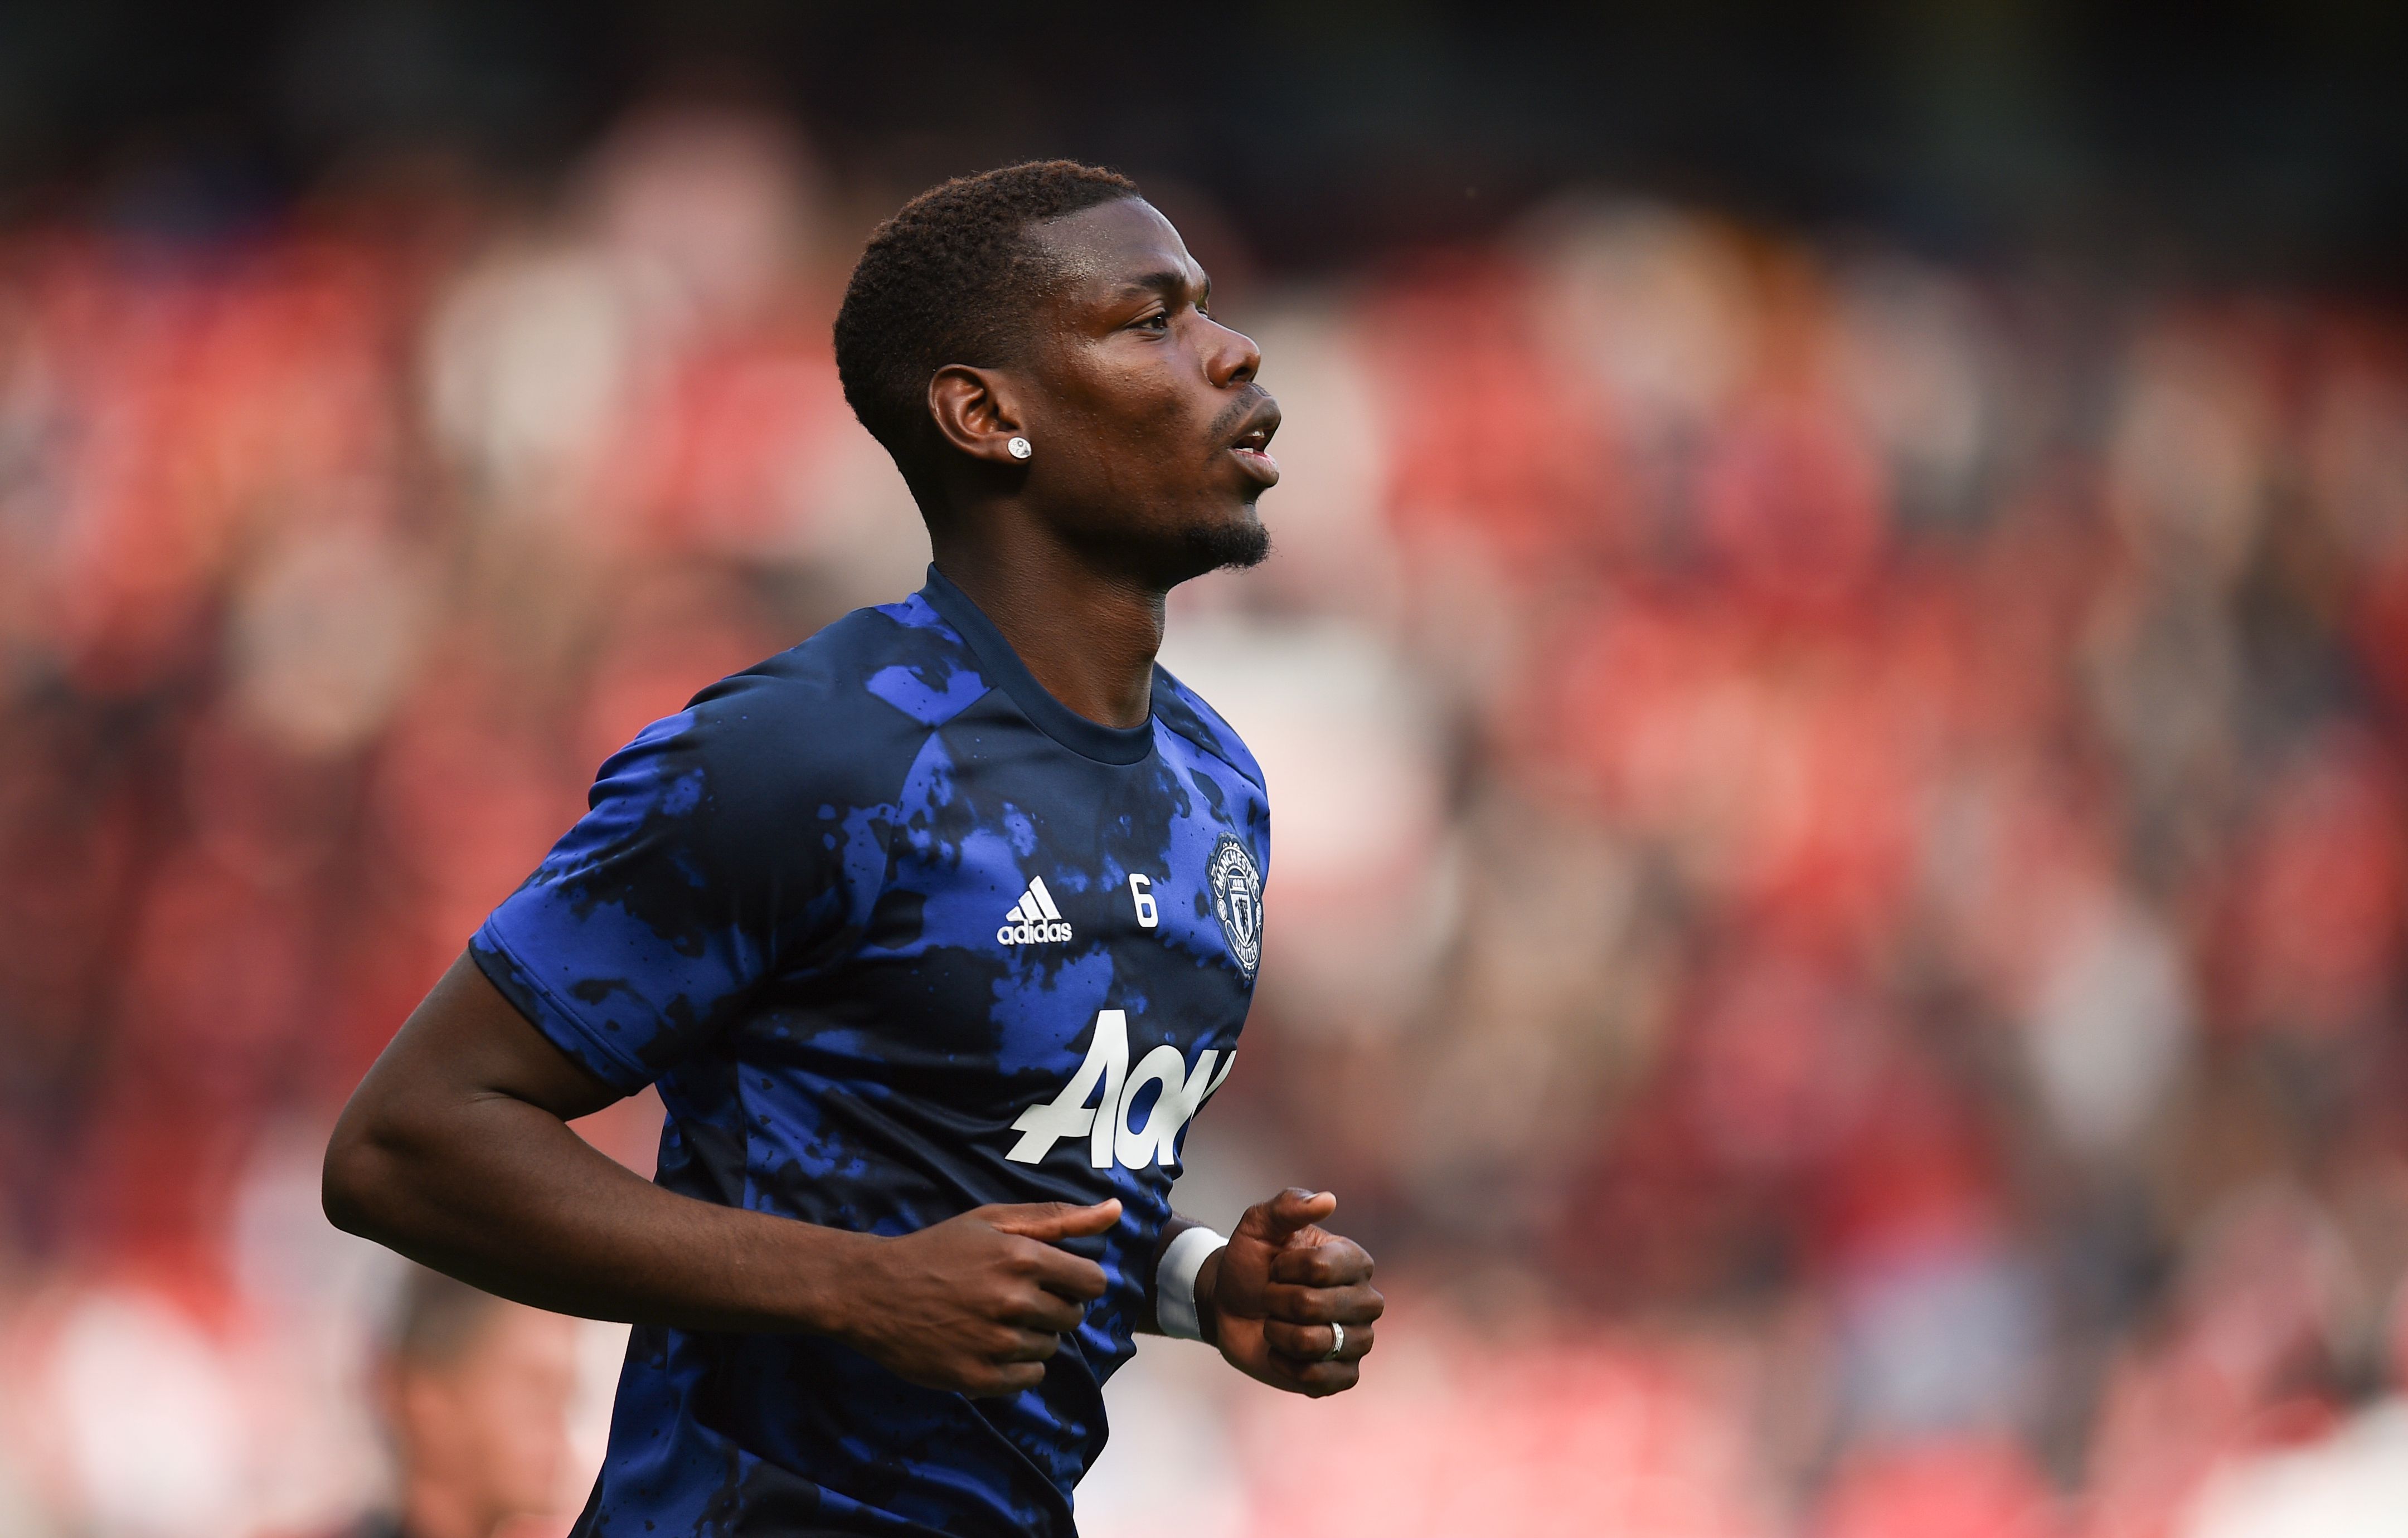 Manchester United's French midfielder Paul Pogba warms up for the English Premier League football match between Manchester United and Chelsea at Old Trafford in Manchester, north west England, on August 11, 2019. (Photo by Oli SCARFF / AFP) / RESTRICTED TO EDITORIAL USE. No use with unauthorized audio, video, data, fixture lists, club/league logos or 'live' services. Online in-match use limited to 120 images. An additional 40 images may be used in extra time. No video emulation. Social media in-match use limited to 120 images. An additional 40 images may be used in extra time. No use in betting publications, games or single club/league/player publications. /         (Photo credit should read OLI SCARFF/AFP/Getty Images)